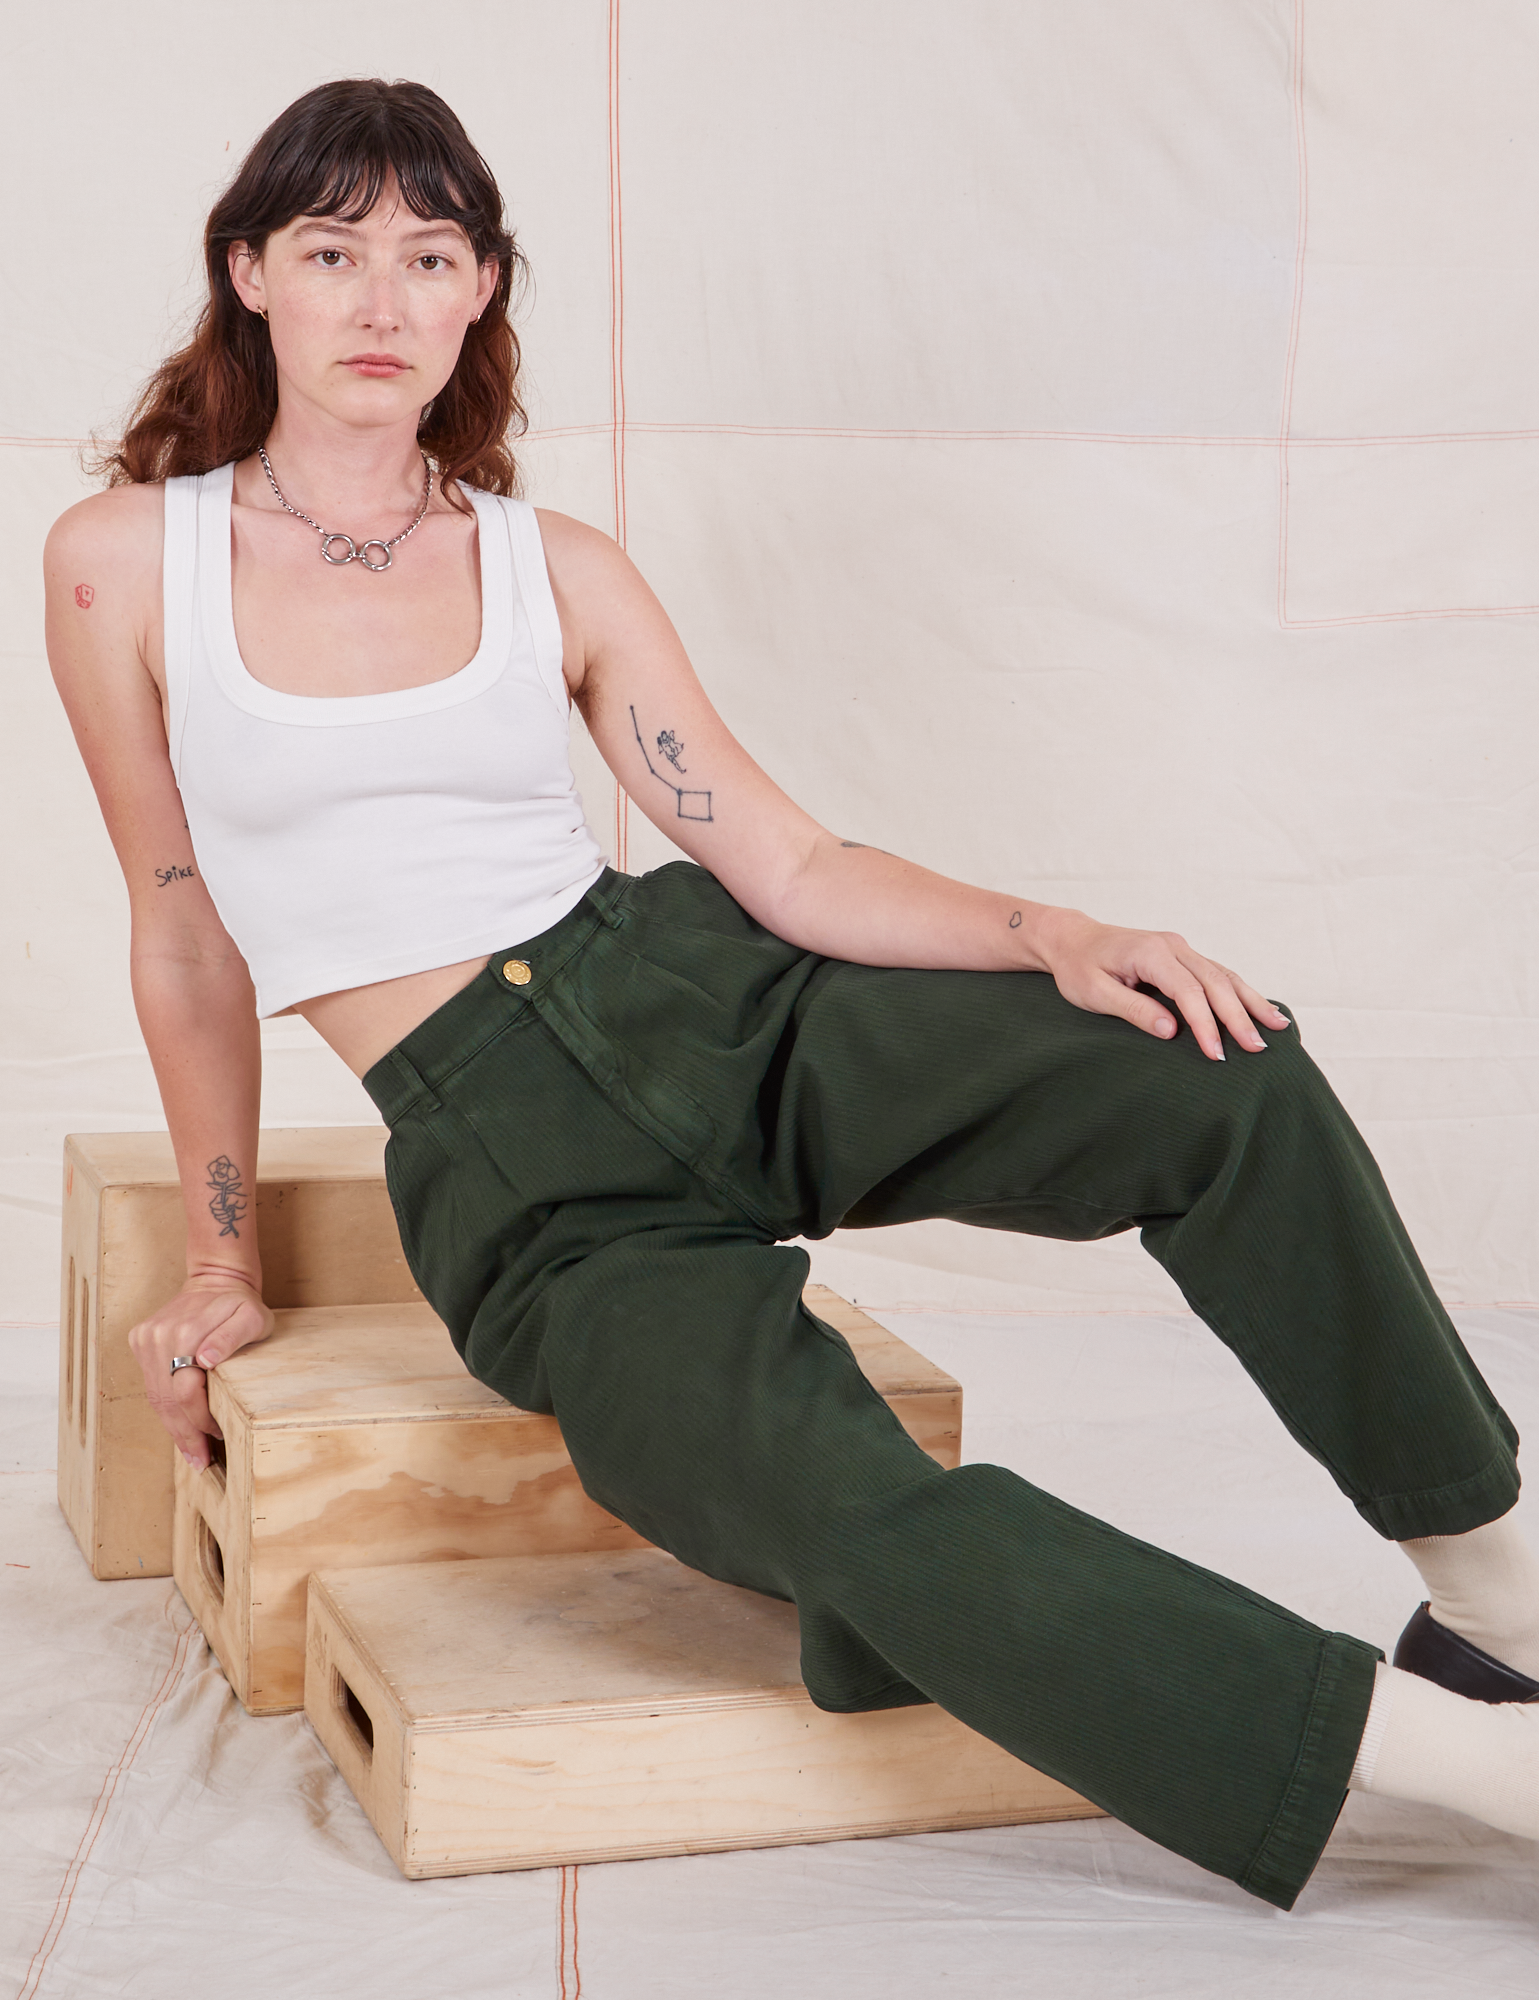 Alex is wearing Heritage Trousers in Swamp Green and vintage off-white Cropped Tank Top